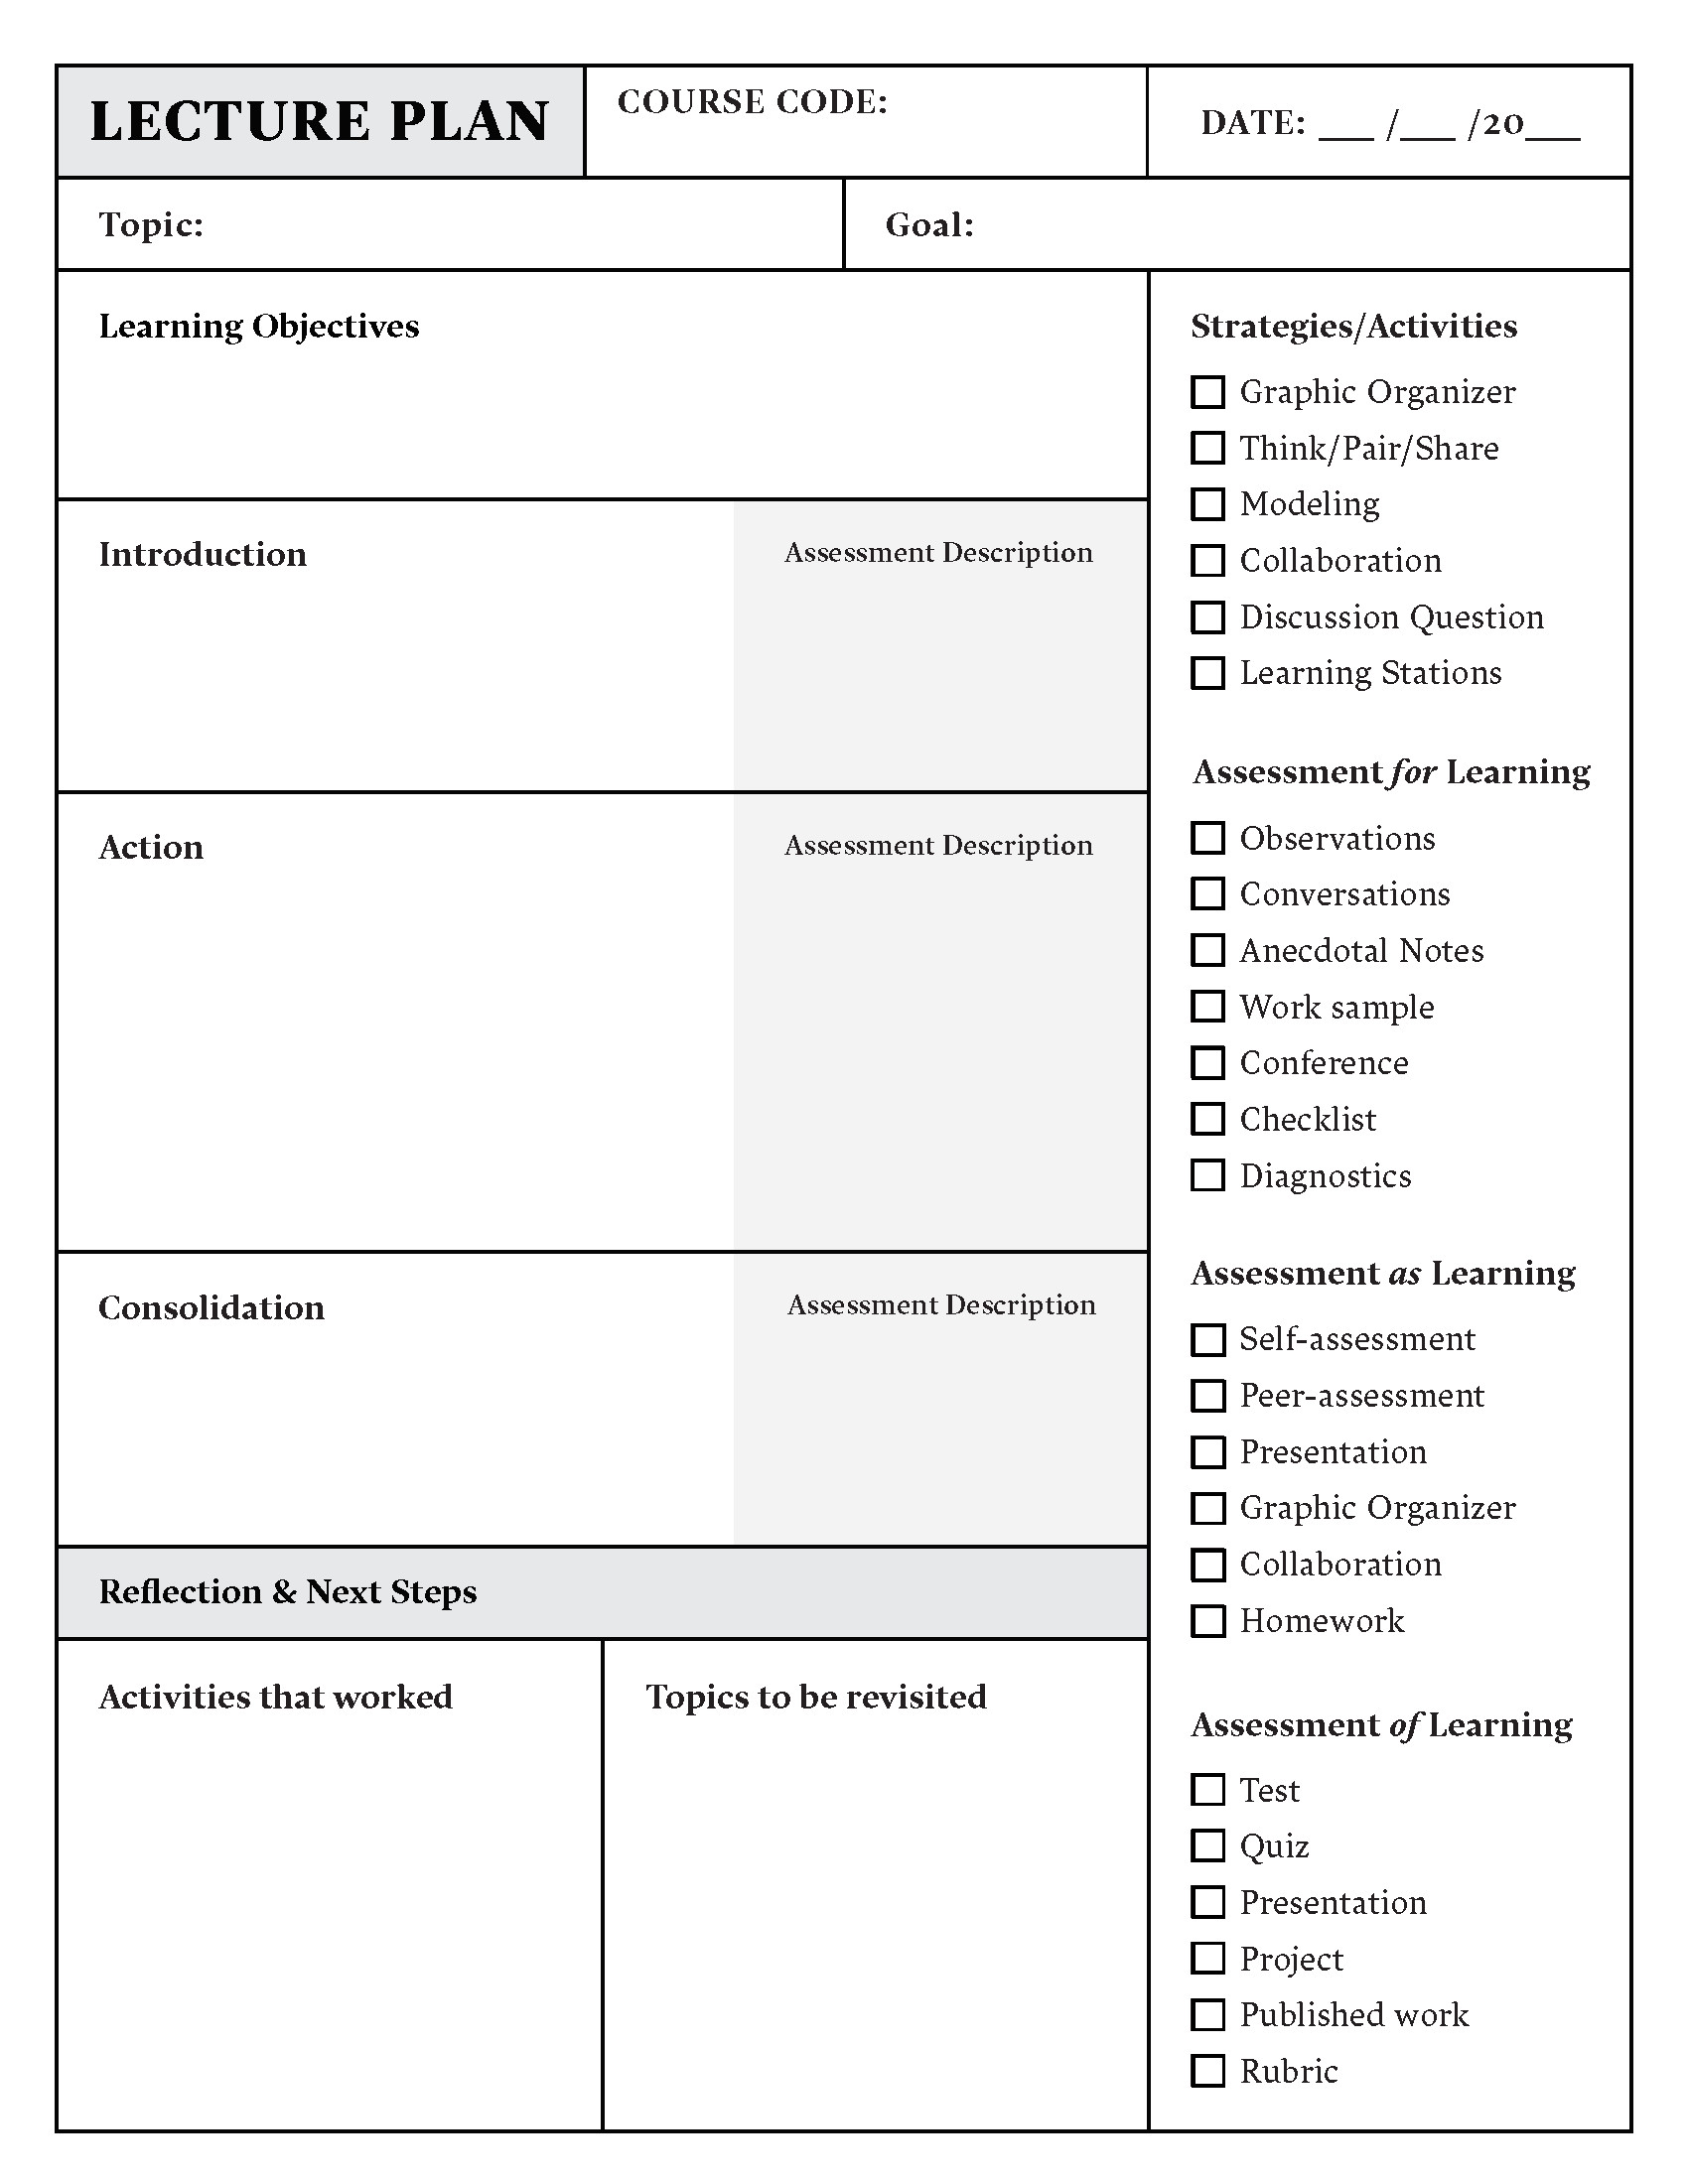 Free Lesson Plans Lesson Plan Template Download In Word or Pdf